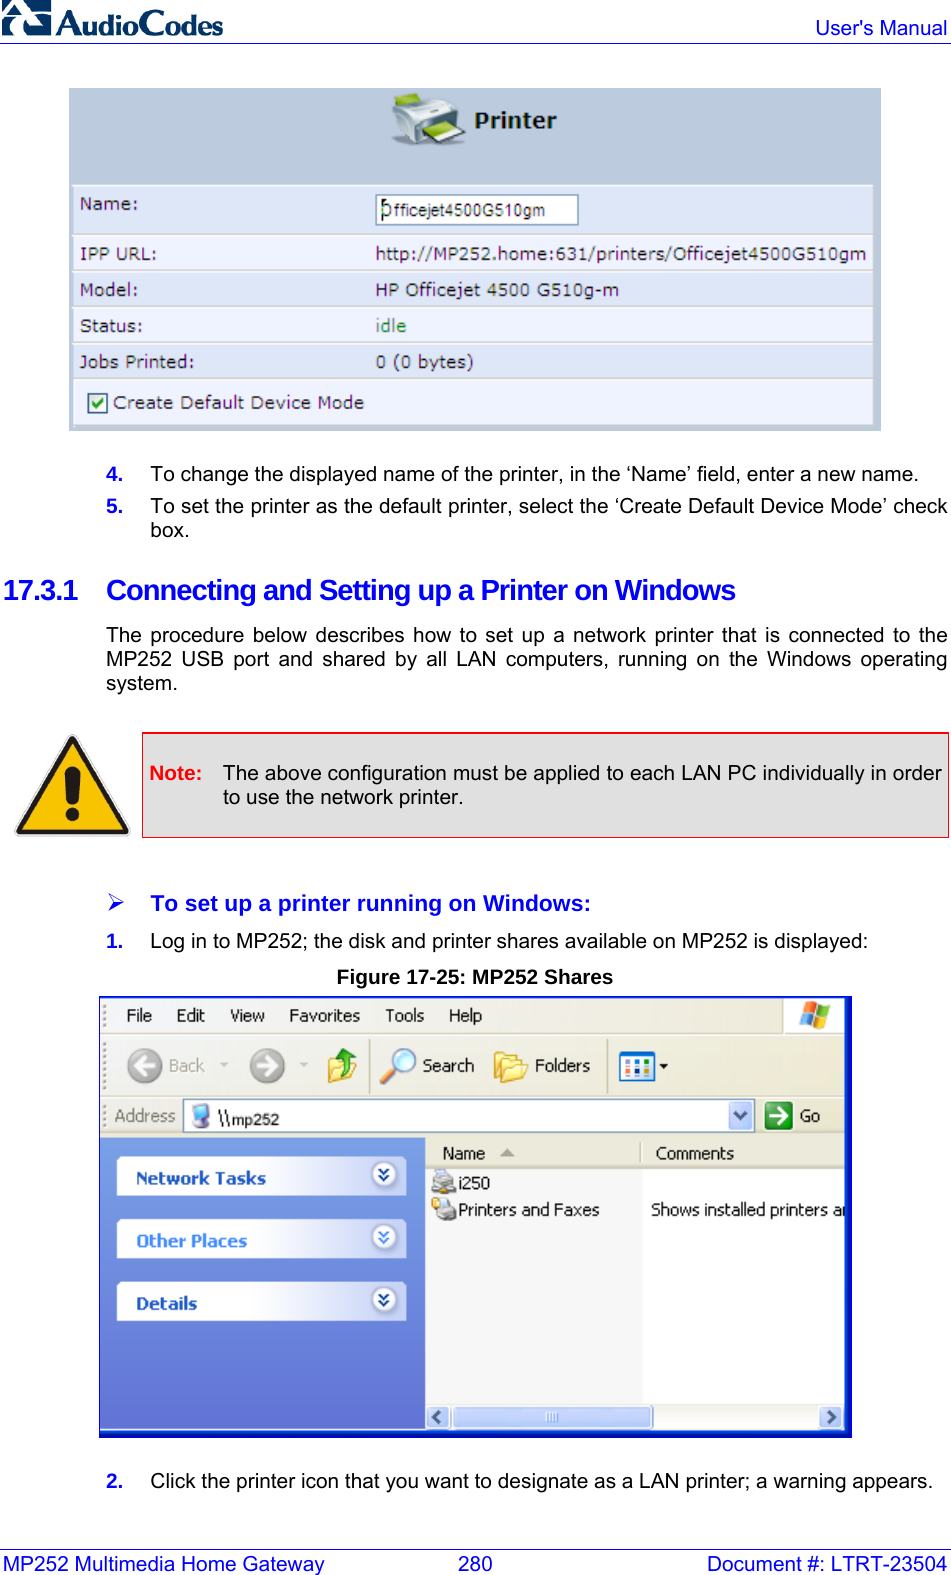 MP252 Multimedia Home Gateway  280  Document #: LTRT-23504  User&apos;s Manual   4.  To change the displayed name of the printer, in the ‘Name’ field, enter a new name.  5.  To set the printer as the default printer, select the ‘Create Default Device Mode’ check box.  17.3.1  Connecting and Setting up a Printer on Windows  The procedure below describes how to set up a network printer that is connected to the MP252 USB port and shared by all LAN computers, running on the Windows operating system.   Note:  The above configuration must be applied to each LAN PC individually in order to use the network printer.  ¾ To set up a printer running on Windows:  1.  Log in to MP252; the disk and printer shares available on MP252 is displayed: Figure 17-25: MP252 Shares  2.  Click the printer icon that you want to designate as a LAN printer; a warning appears. 